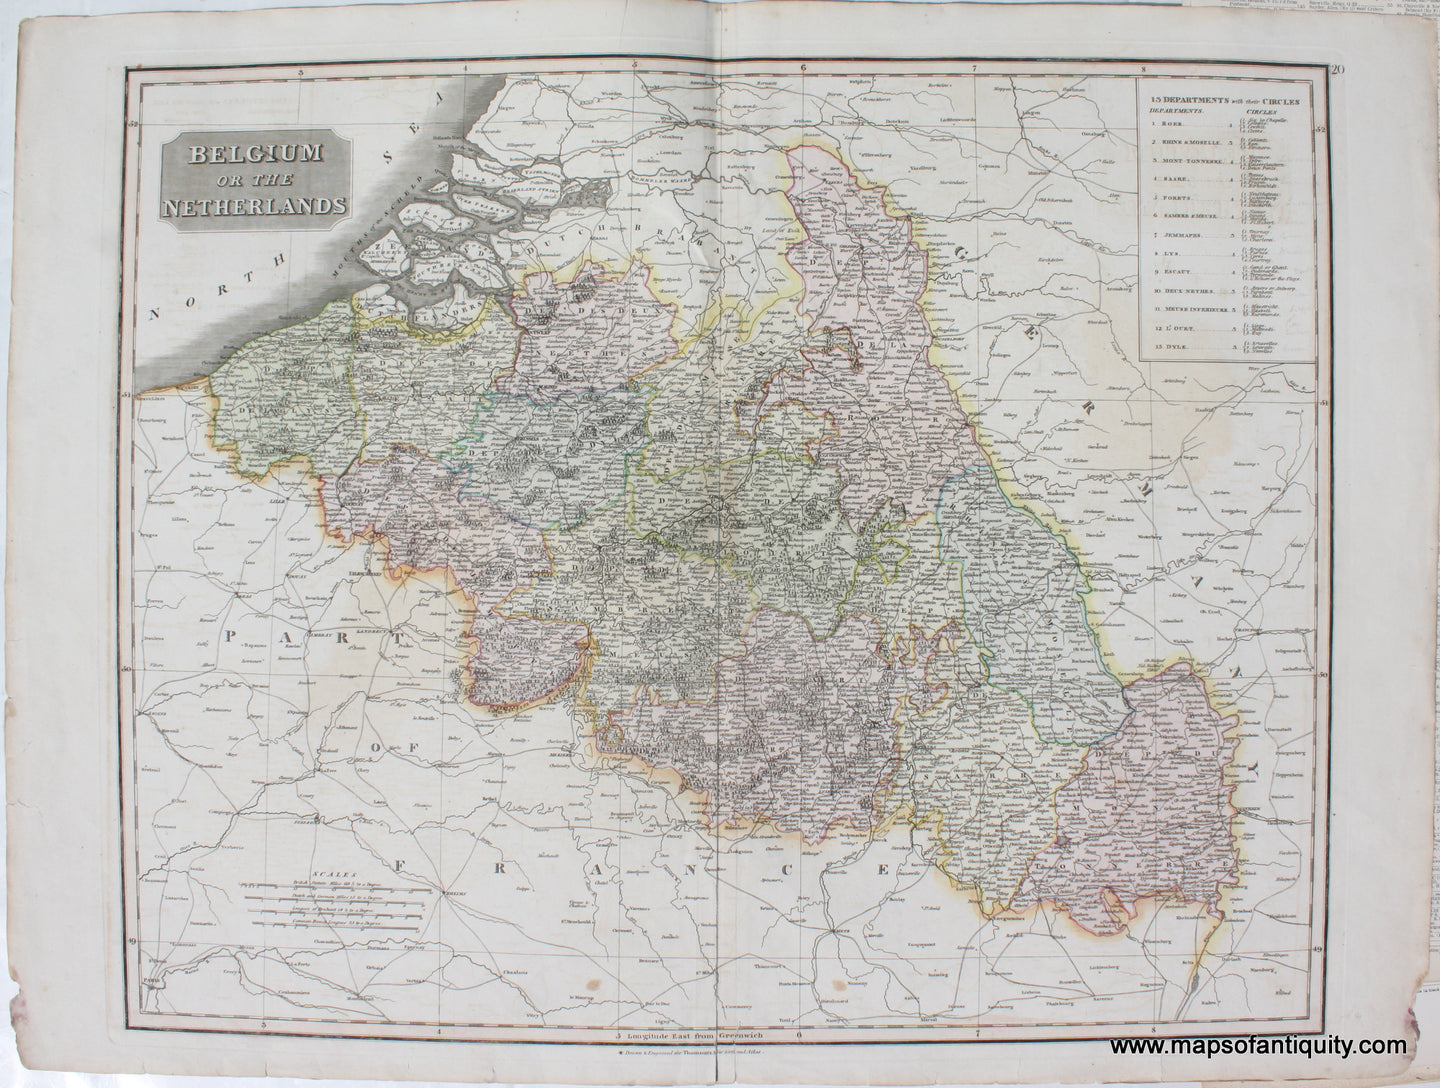 Antique-Map-Belgium-or-the-Netherlands-Thomson-Thomson's-New-General-Atlas-1817-1810s-1800s-Early-19th-Century-Maps-of-Antiquity